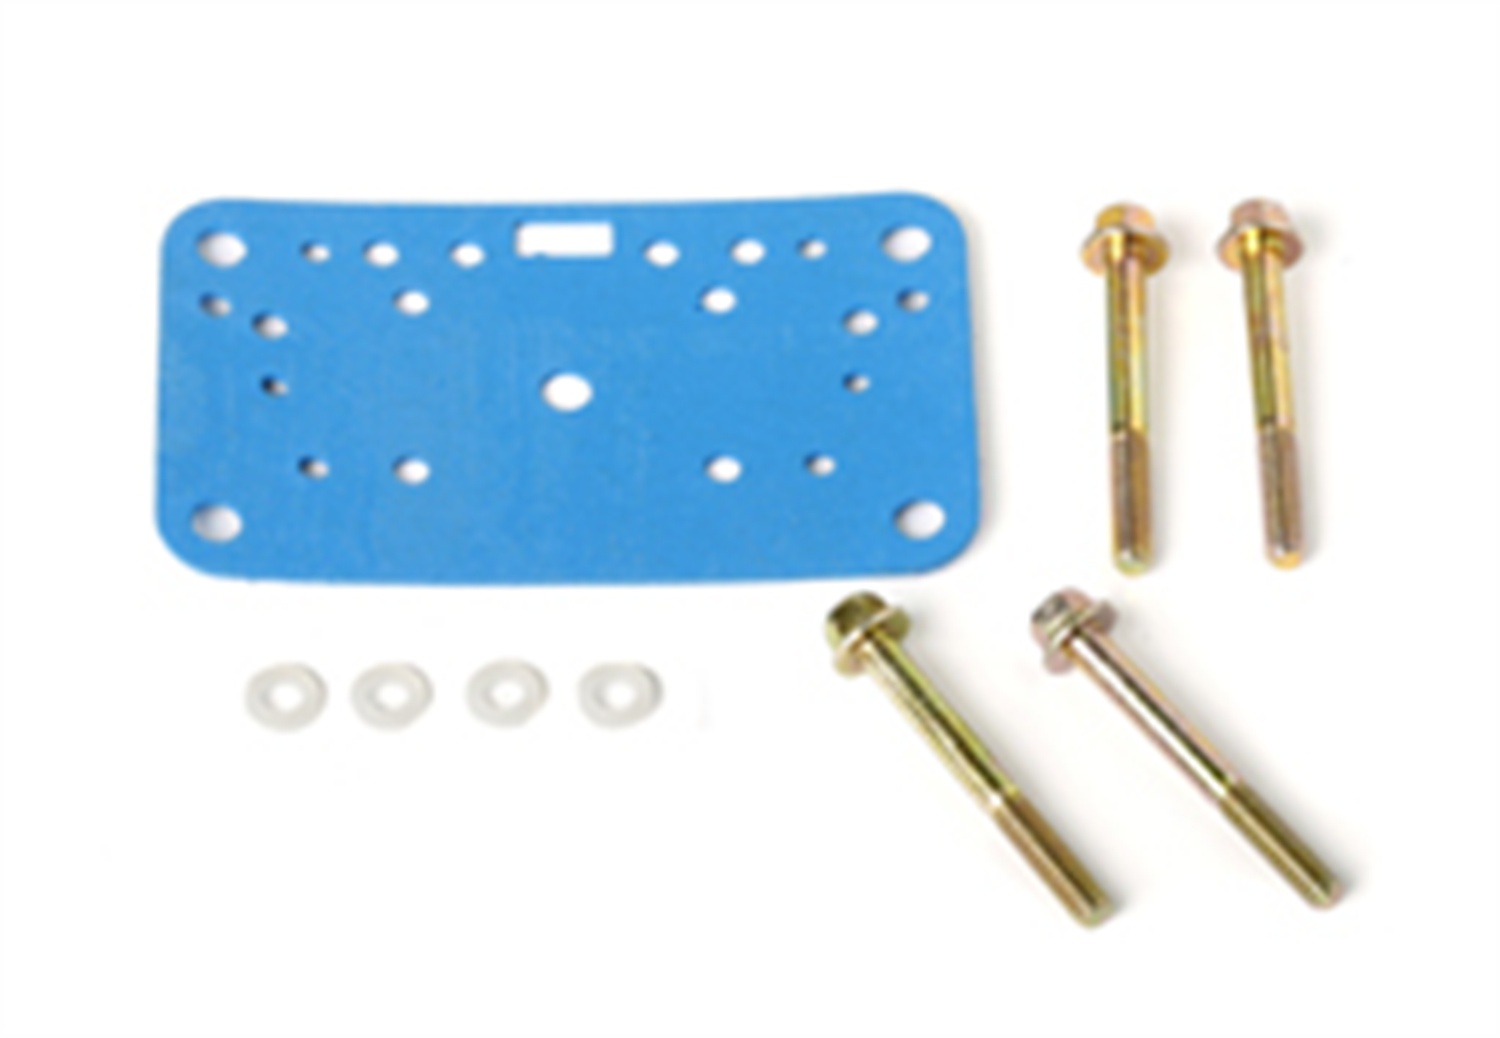 Holley Performance Holley Performance 26-125 Fuel Bowl Screw & Gasket Kit